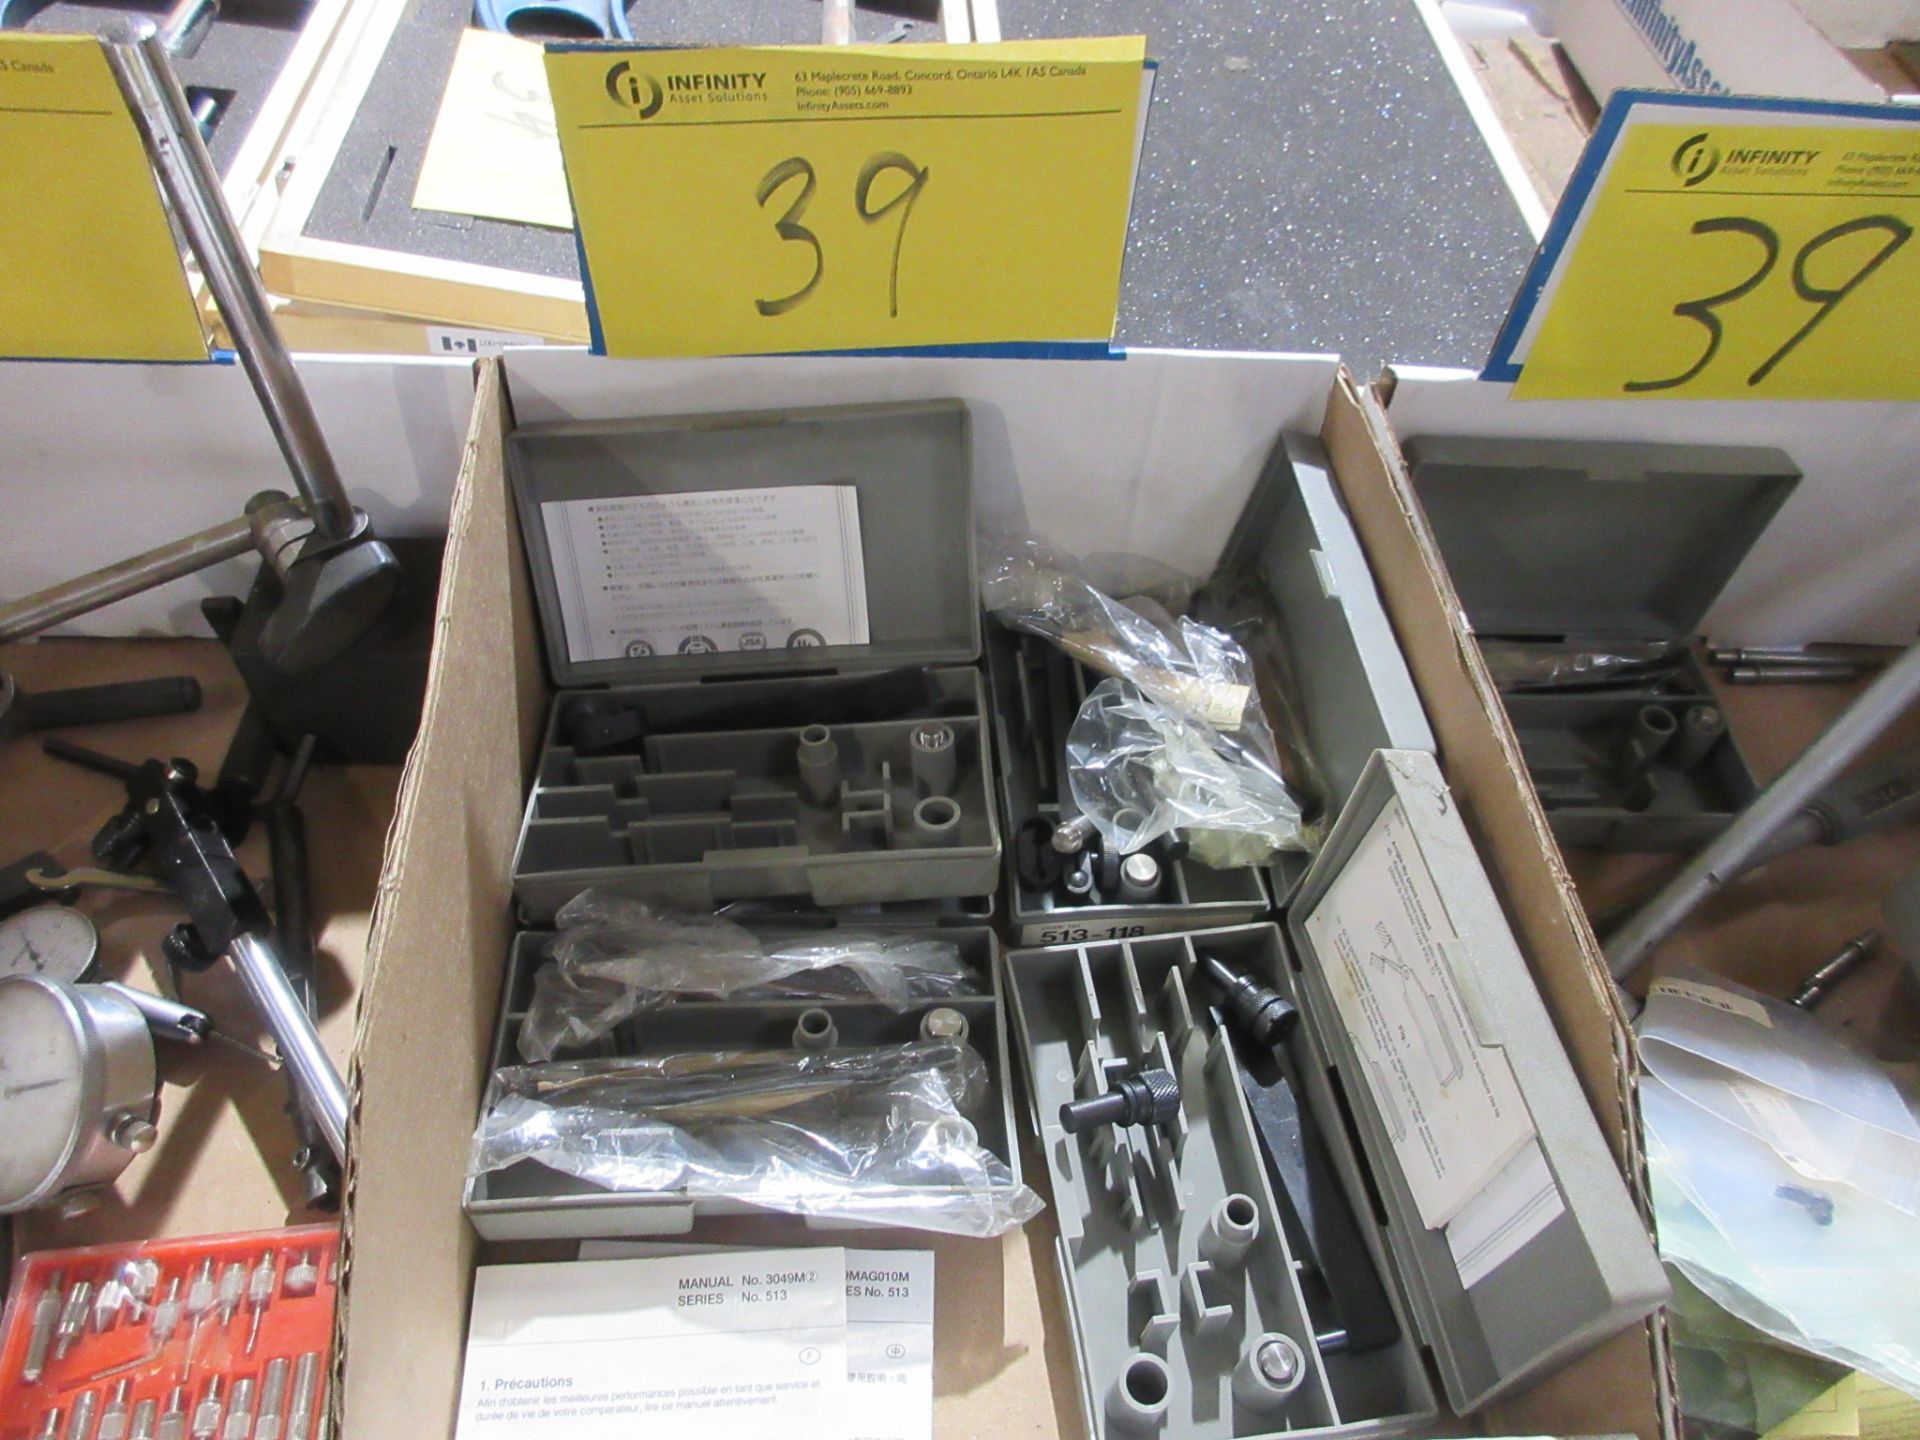 LOT OF (3) BOXES OF 1.4-2.5", .7-1.4" MITUTOYO HOLE GAUGE SETS, MITUTOYO PROBE, INDICATORS, MAG - Image 4 of 5